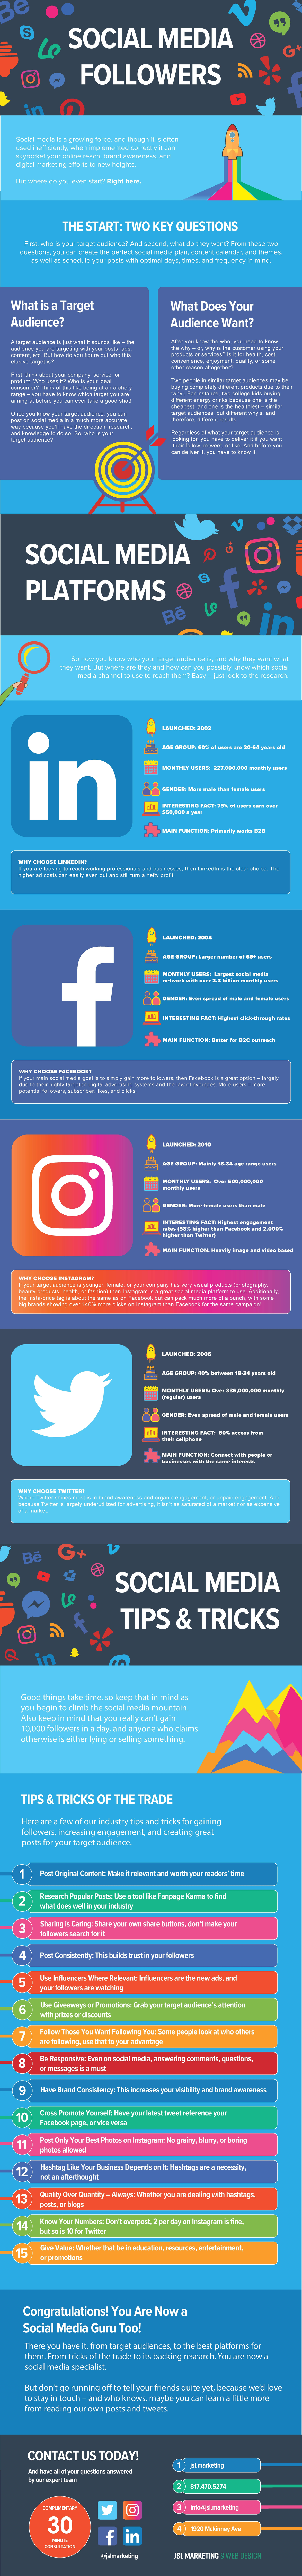 How to Gain Followers on Social Media Infographic